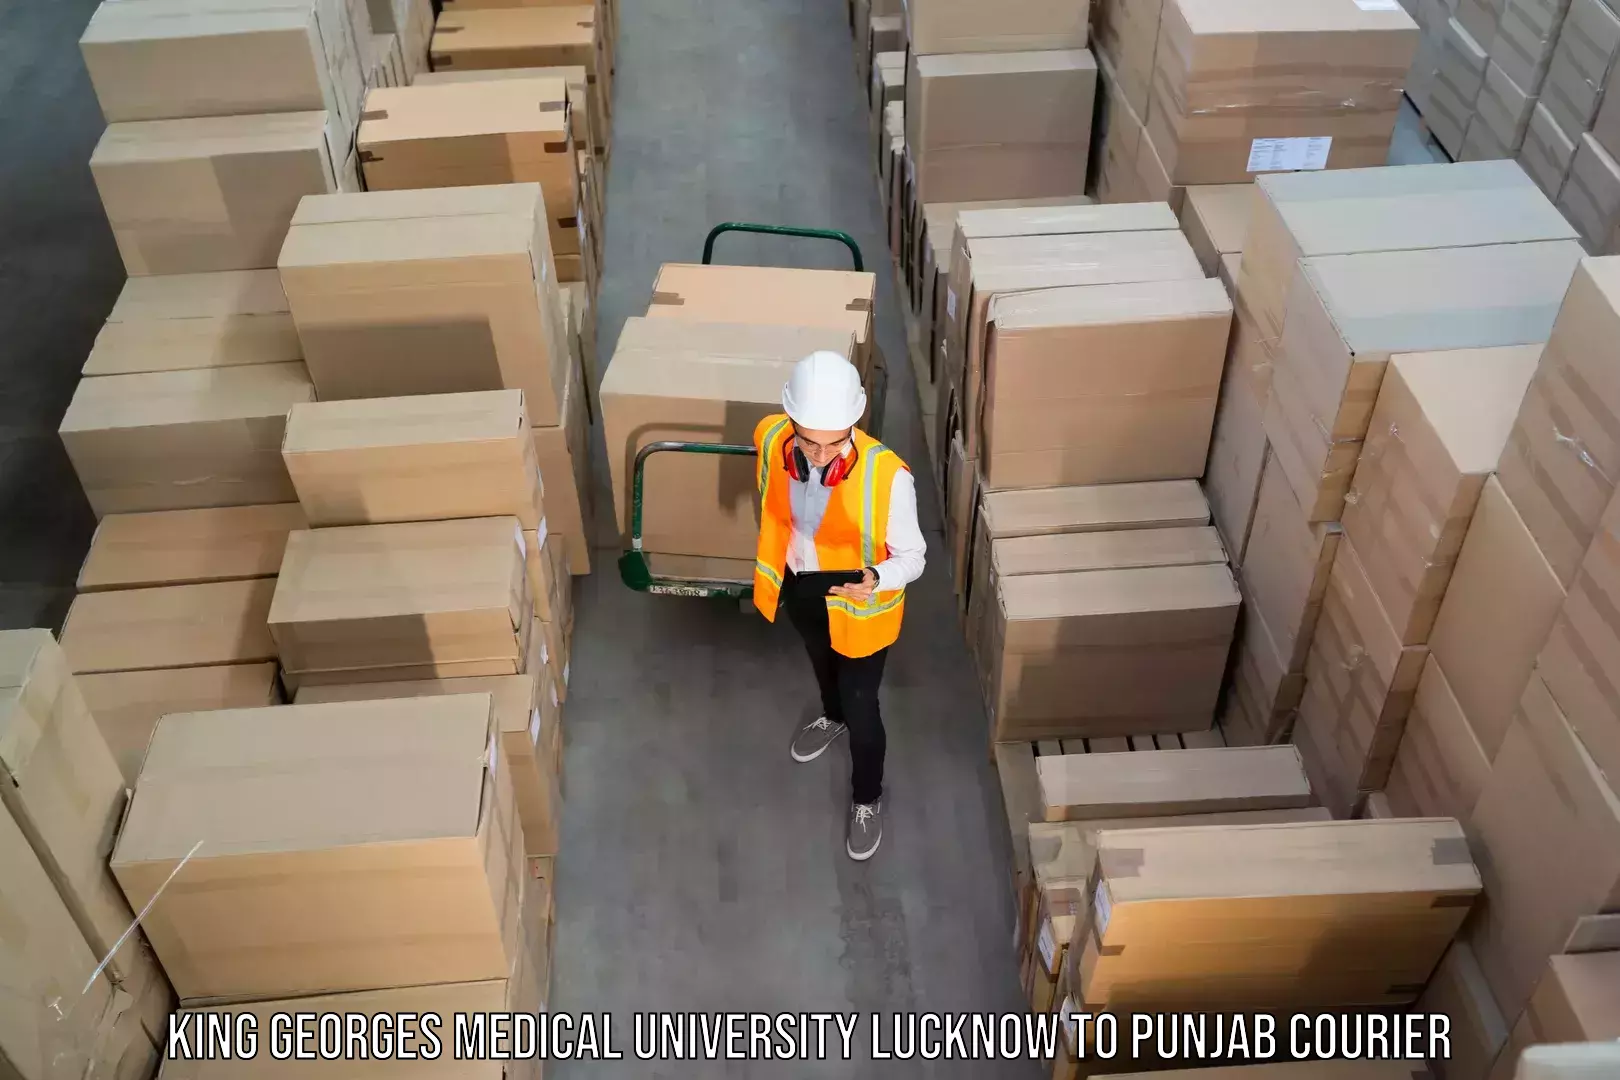 International parcel service King Georges Medical University Lucknow to Amritsar